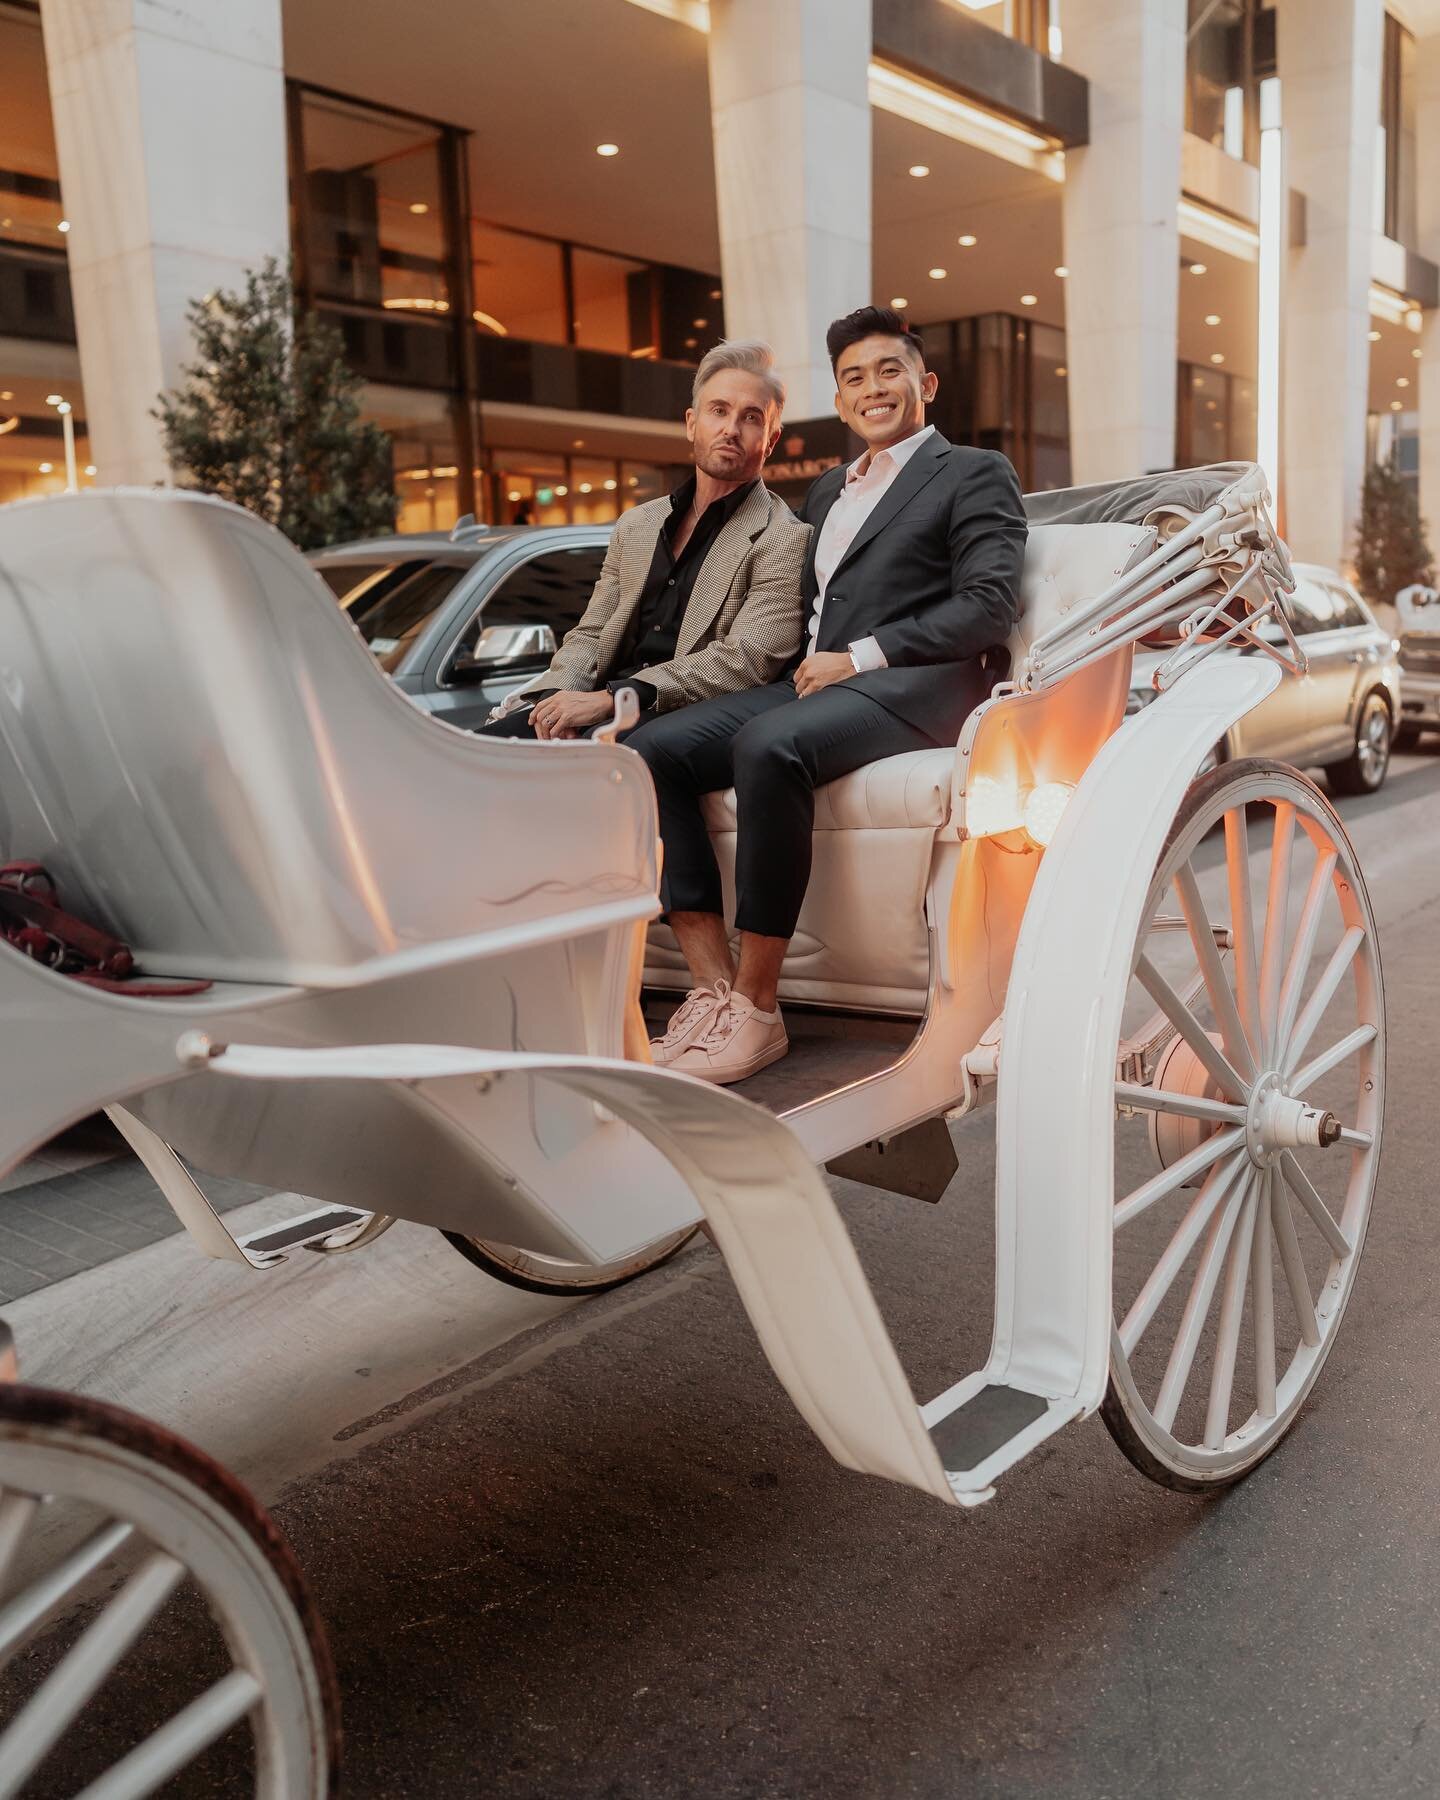 Happy Friday everyone!! Throwback to this cute carriage off into the sunset after a beautiful proposal😭🫶
.
.
.
#engament #dallas #dfwweddingphotographer